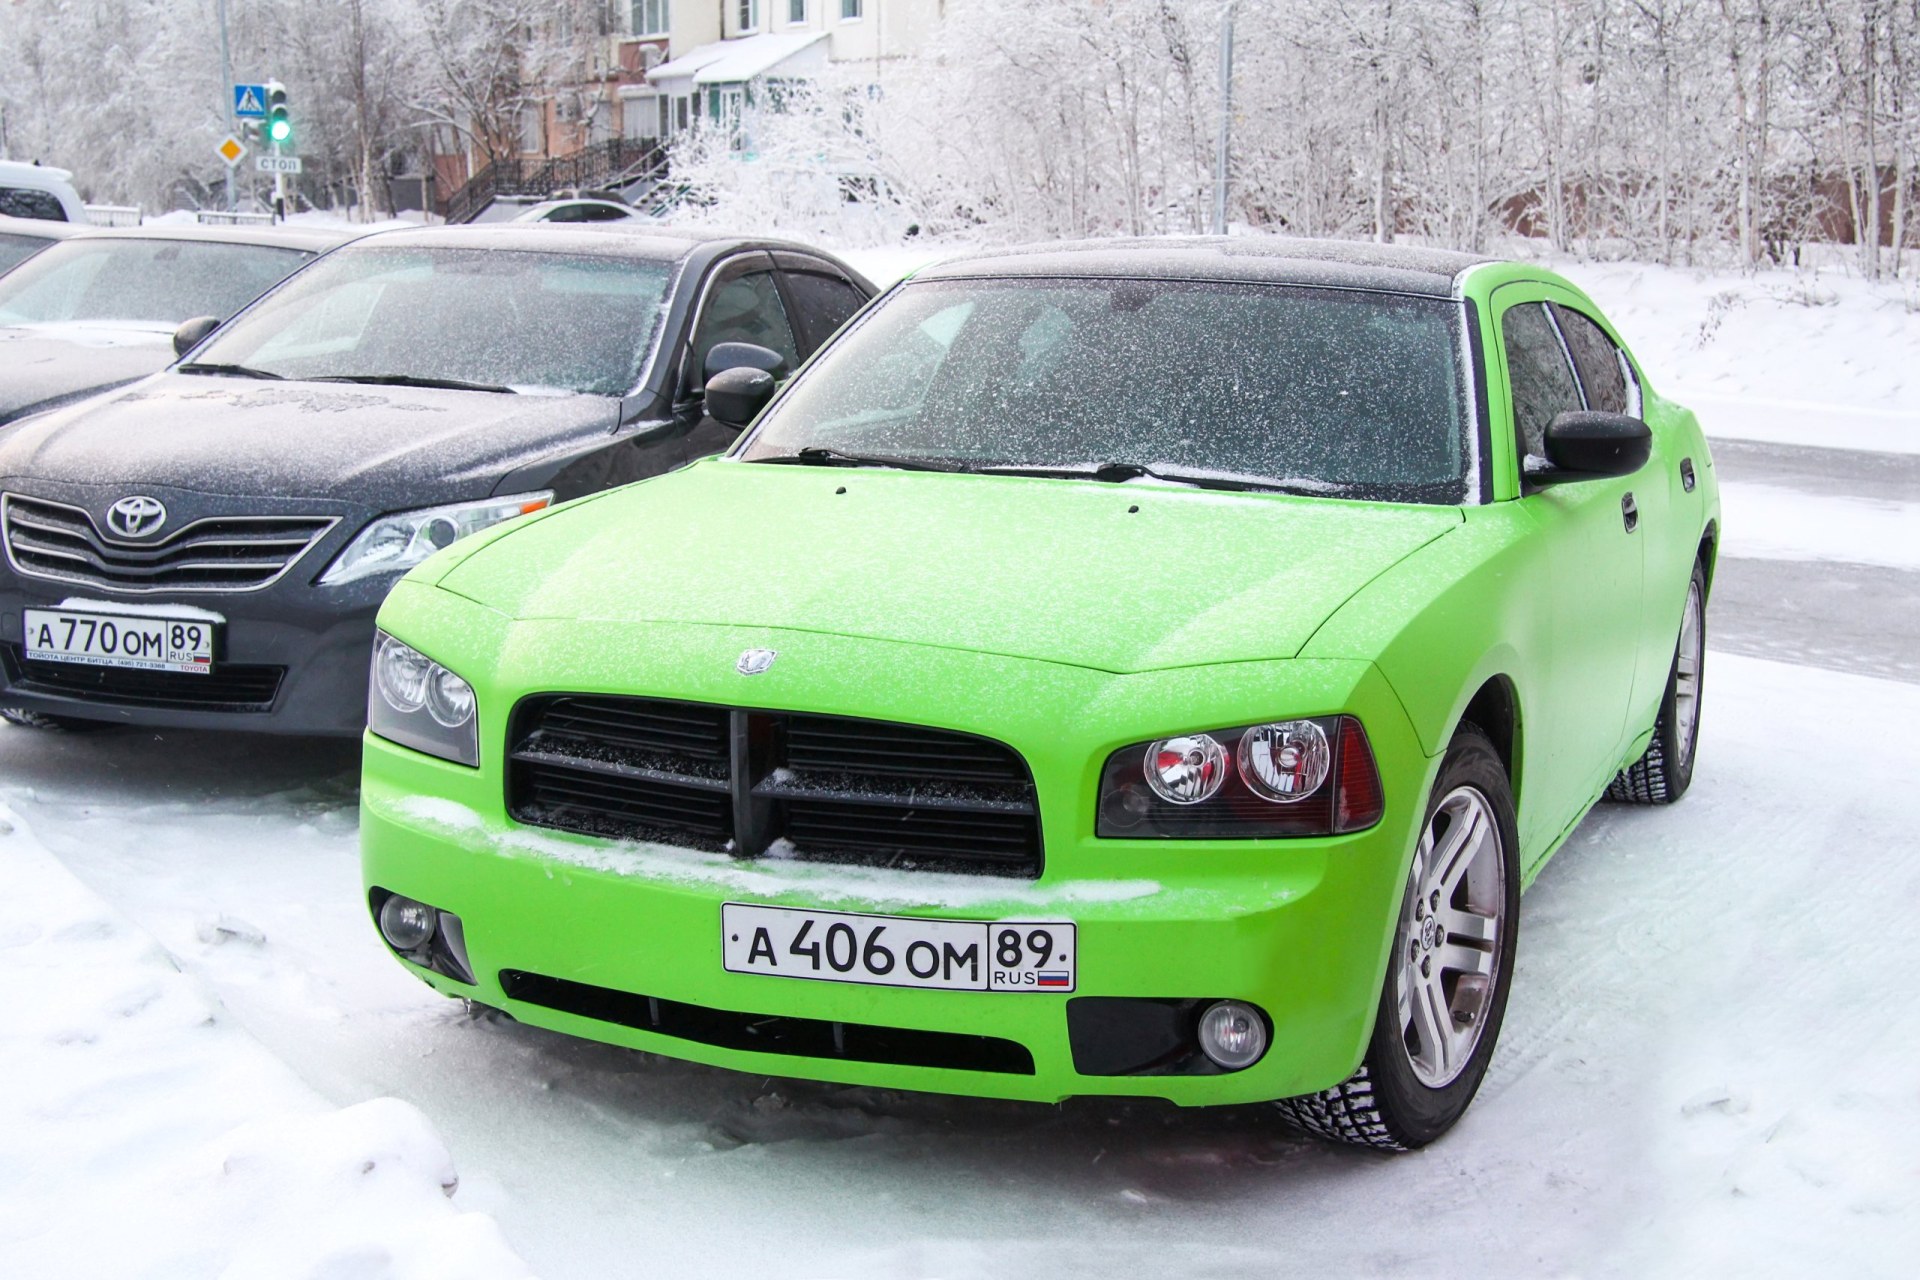 2007-2009 Green saloon car Dodge Charger in a city street.